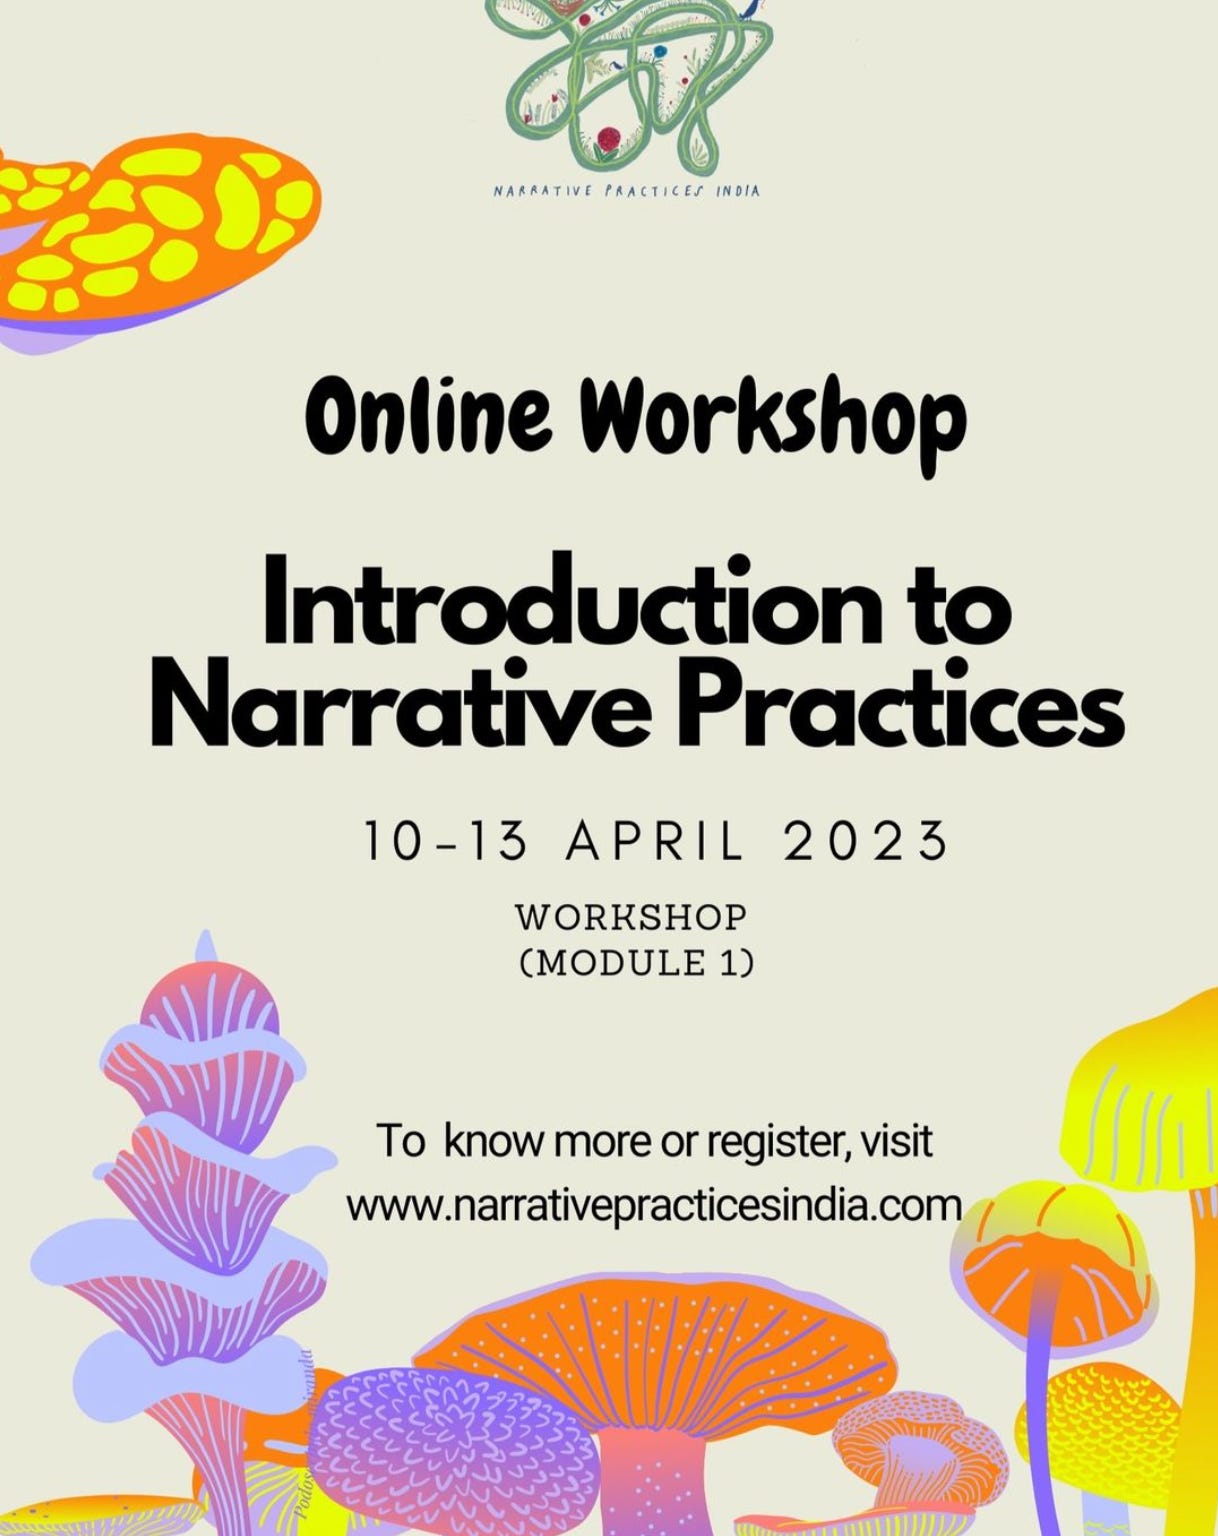 A poster for online workshop on introduction to narrative practices with logo of NPI Collective at the top center and drawing of mushrooms in bring fluorescent colours at the bottom of the page. text arranged in the center saying: Online workshop , Introduction to Narrative Practices 10 - 13 April 2023 workshop Module 1. to know more or register, visit www.narrativepracticesindia.com